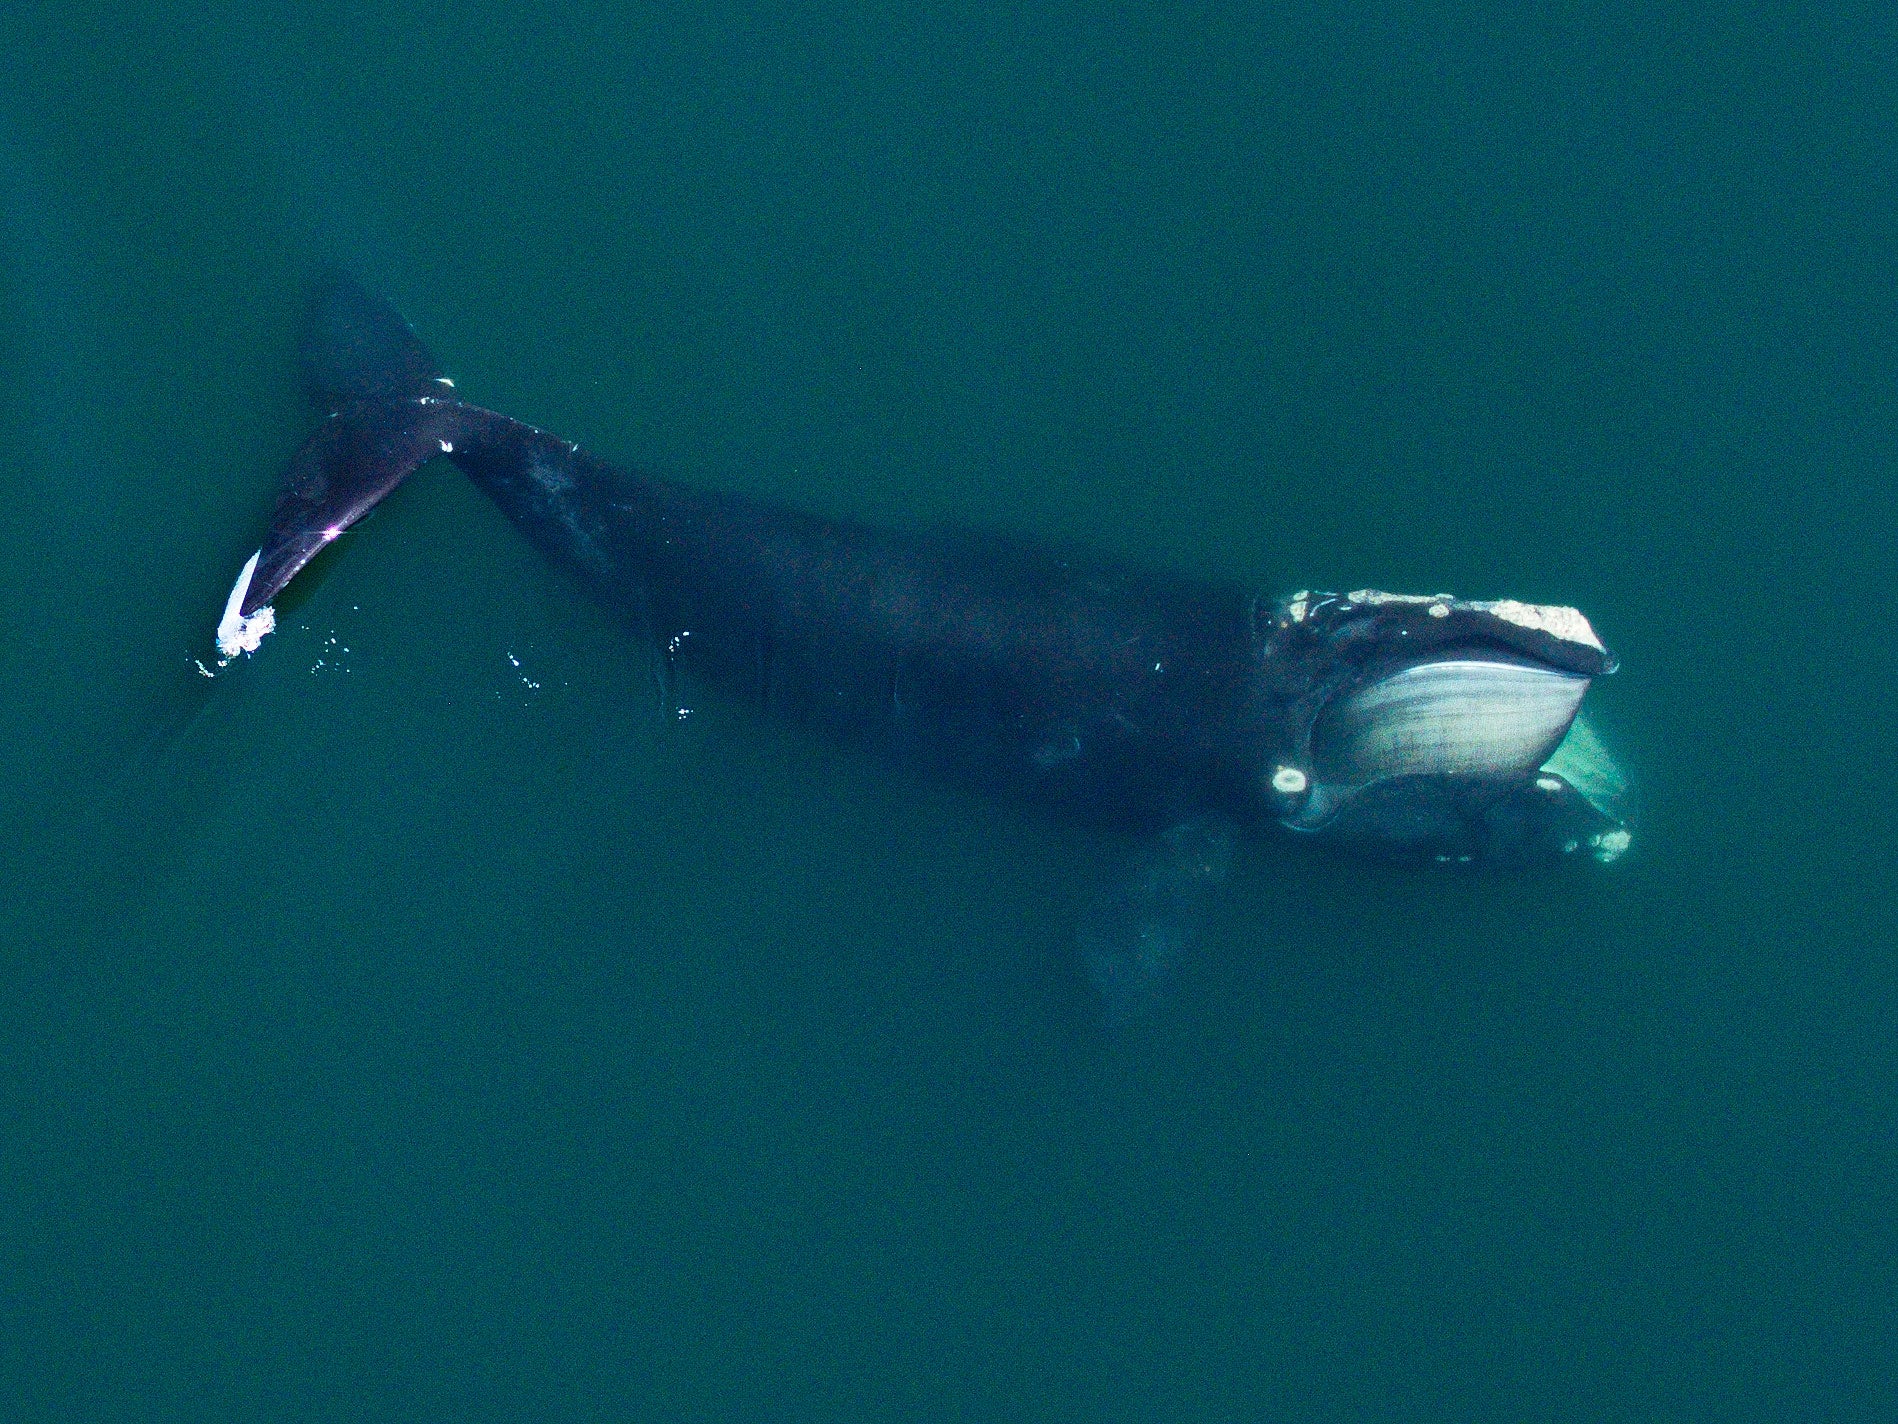 Less than 400 right whales remain in the wild